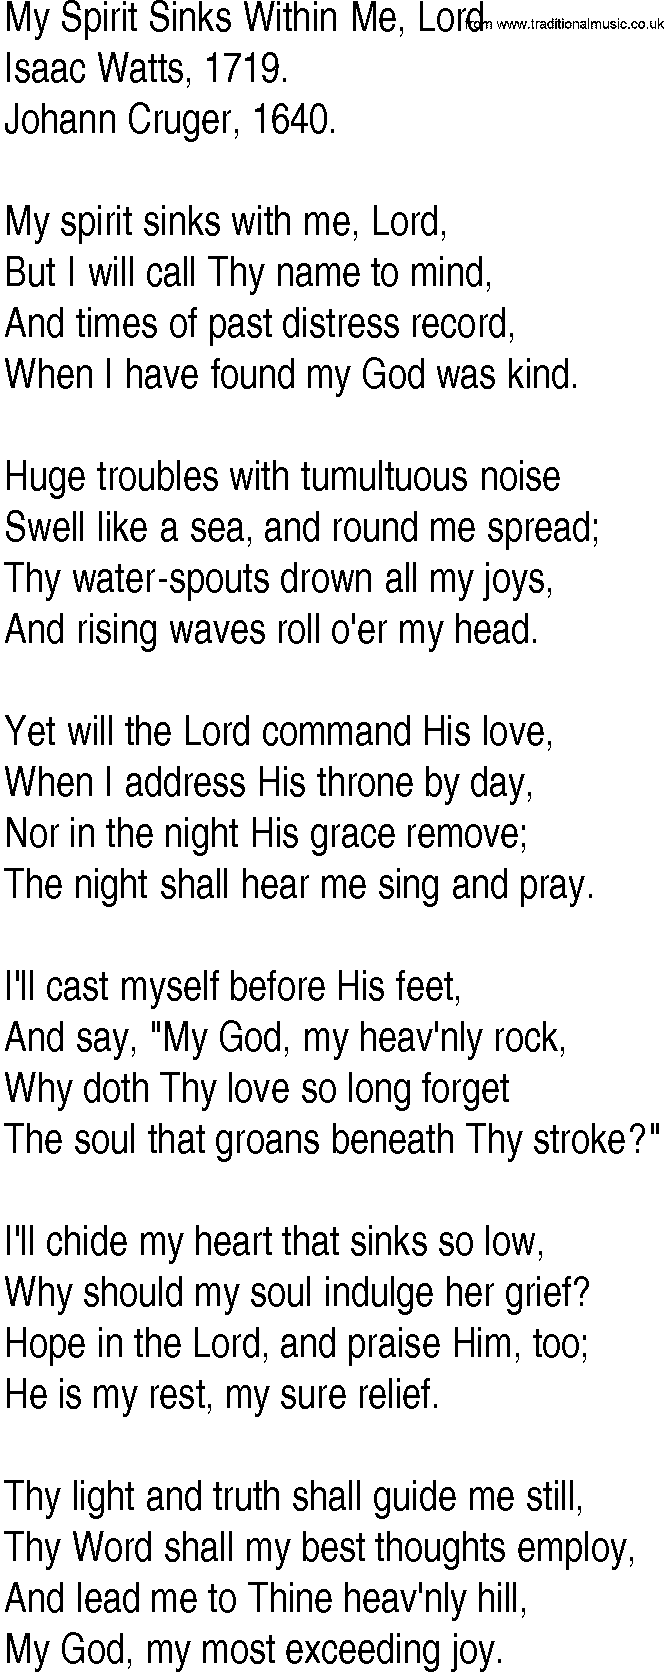 Hymn and Gospel Song: My Spirit Sinks Within Me, Lord by Isaac Watts lyrics